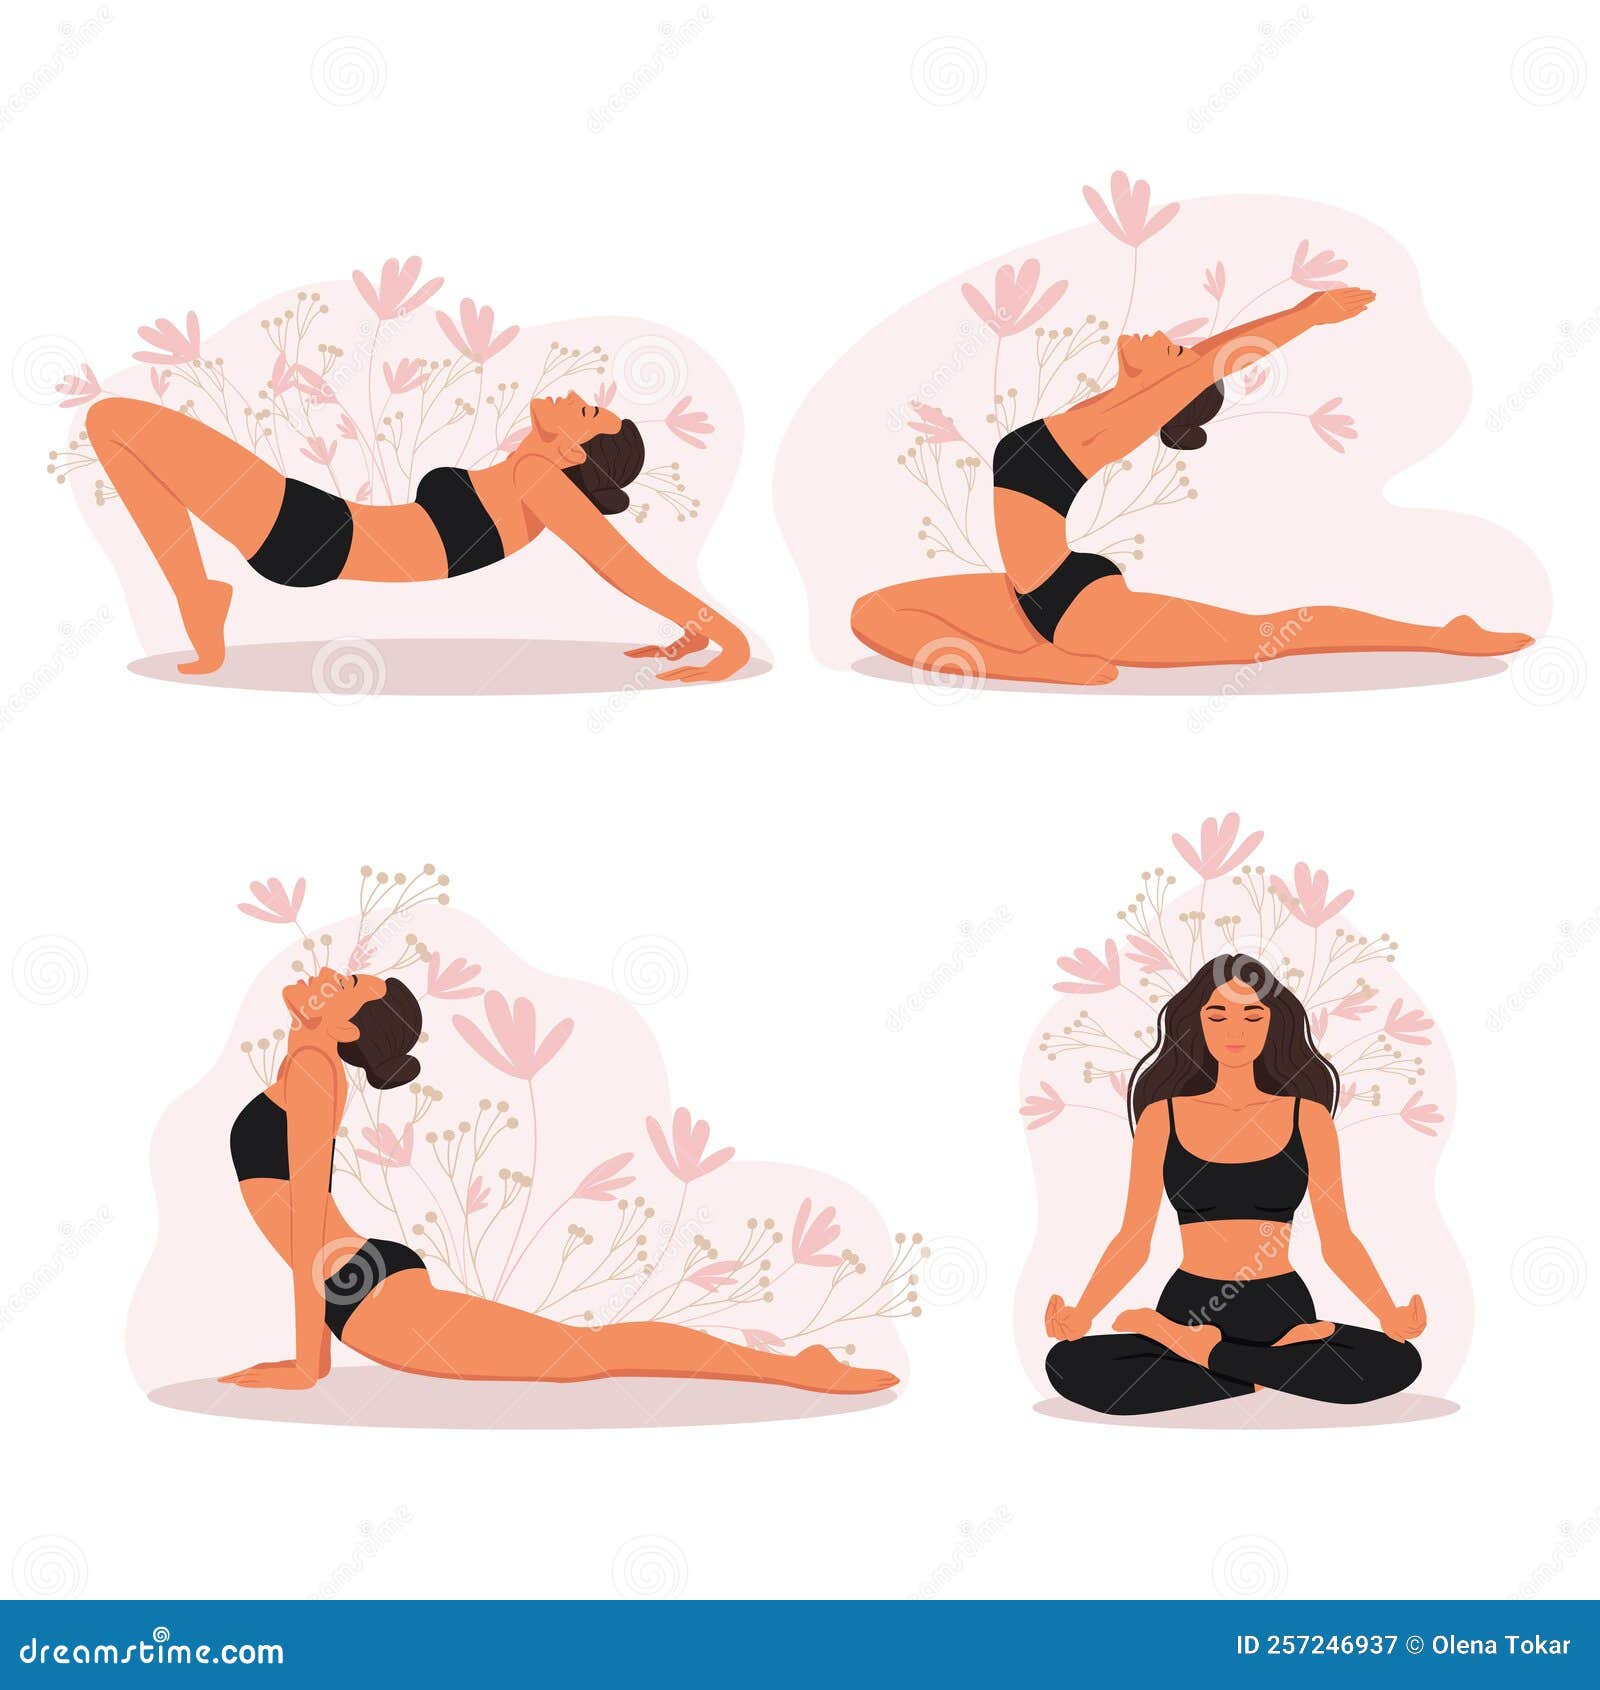 Yoga Poses And Styles: What are Their Attributed Benefits? — Soul Tribes  Yoga + Meditation